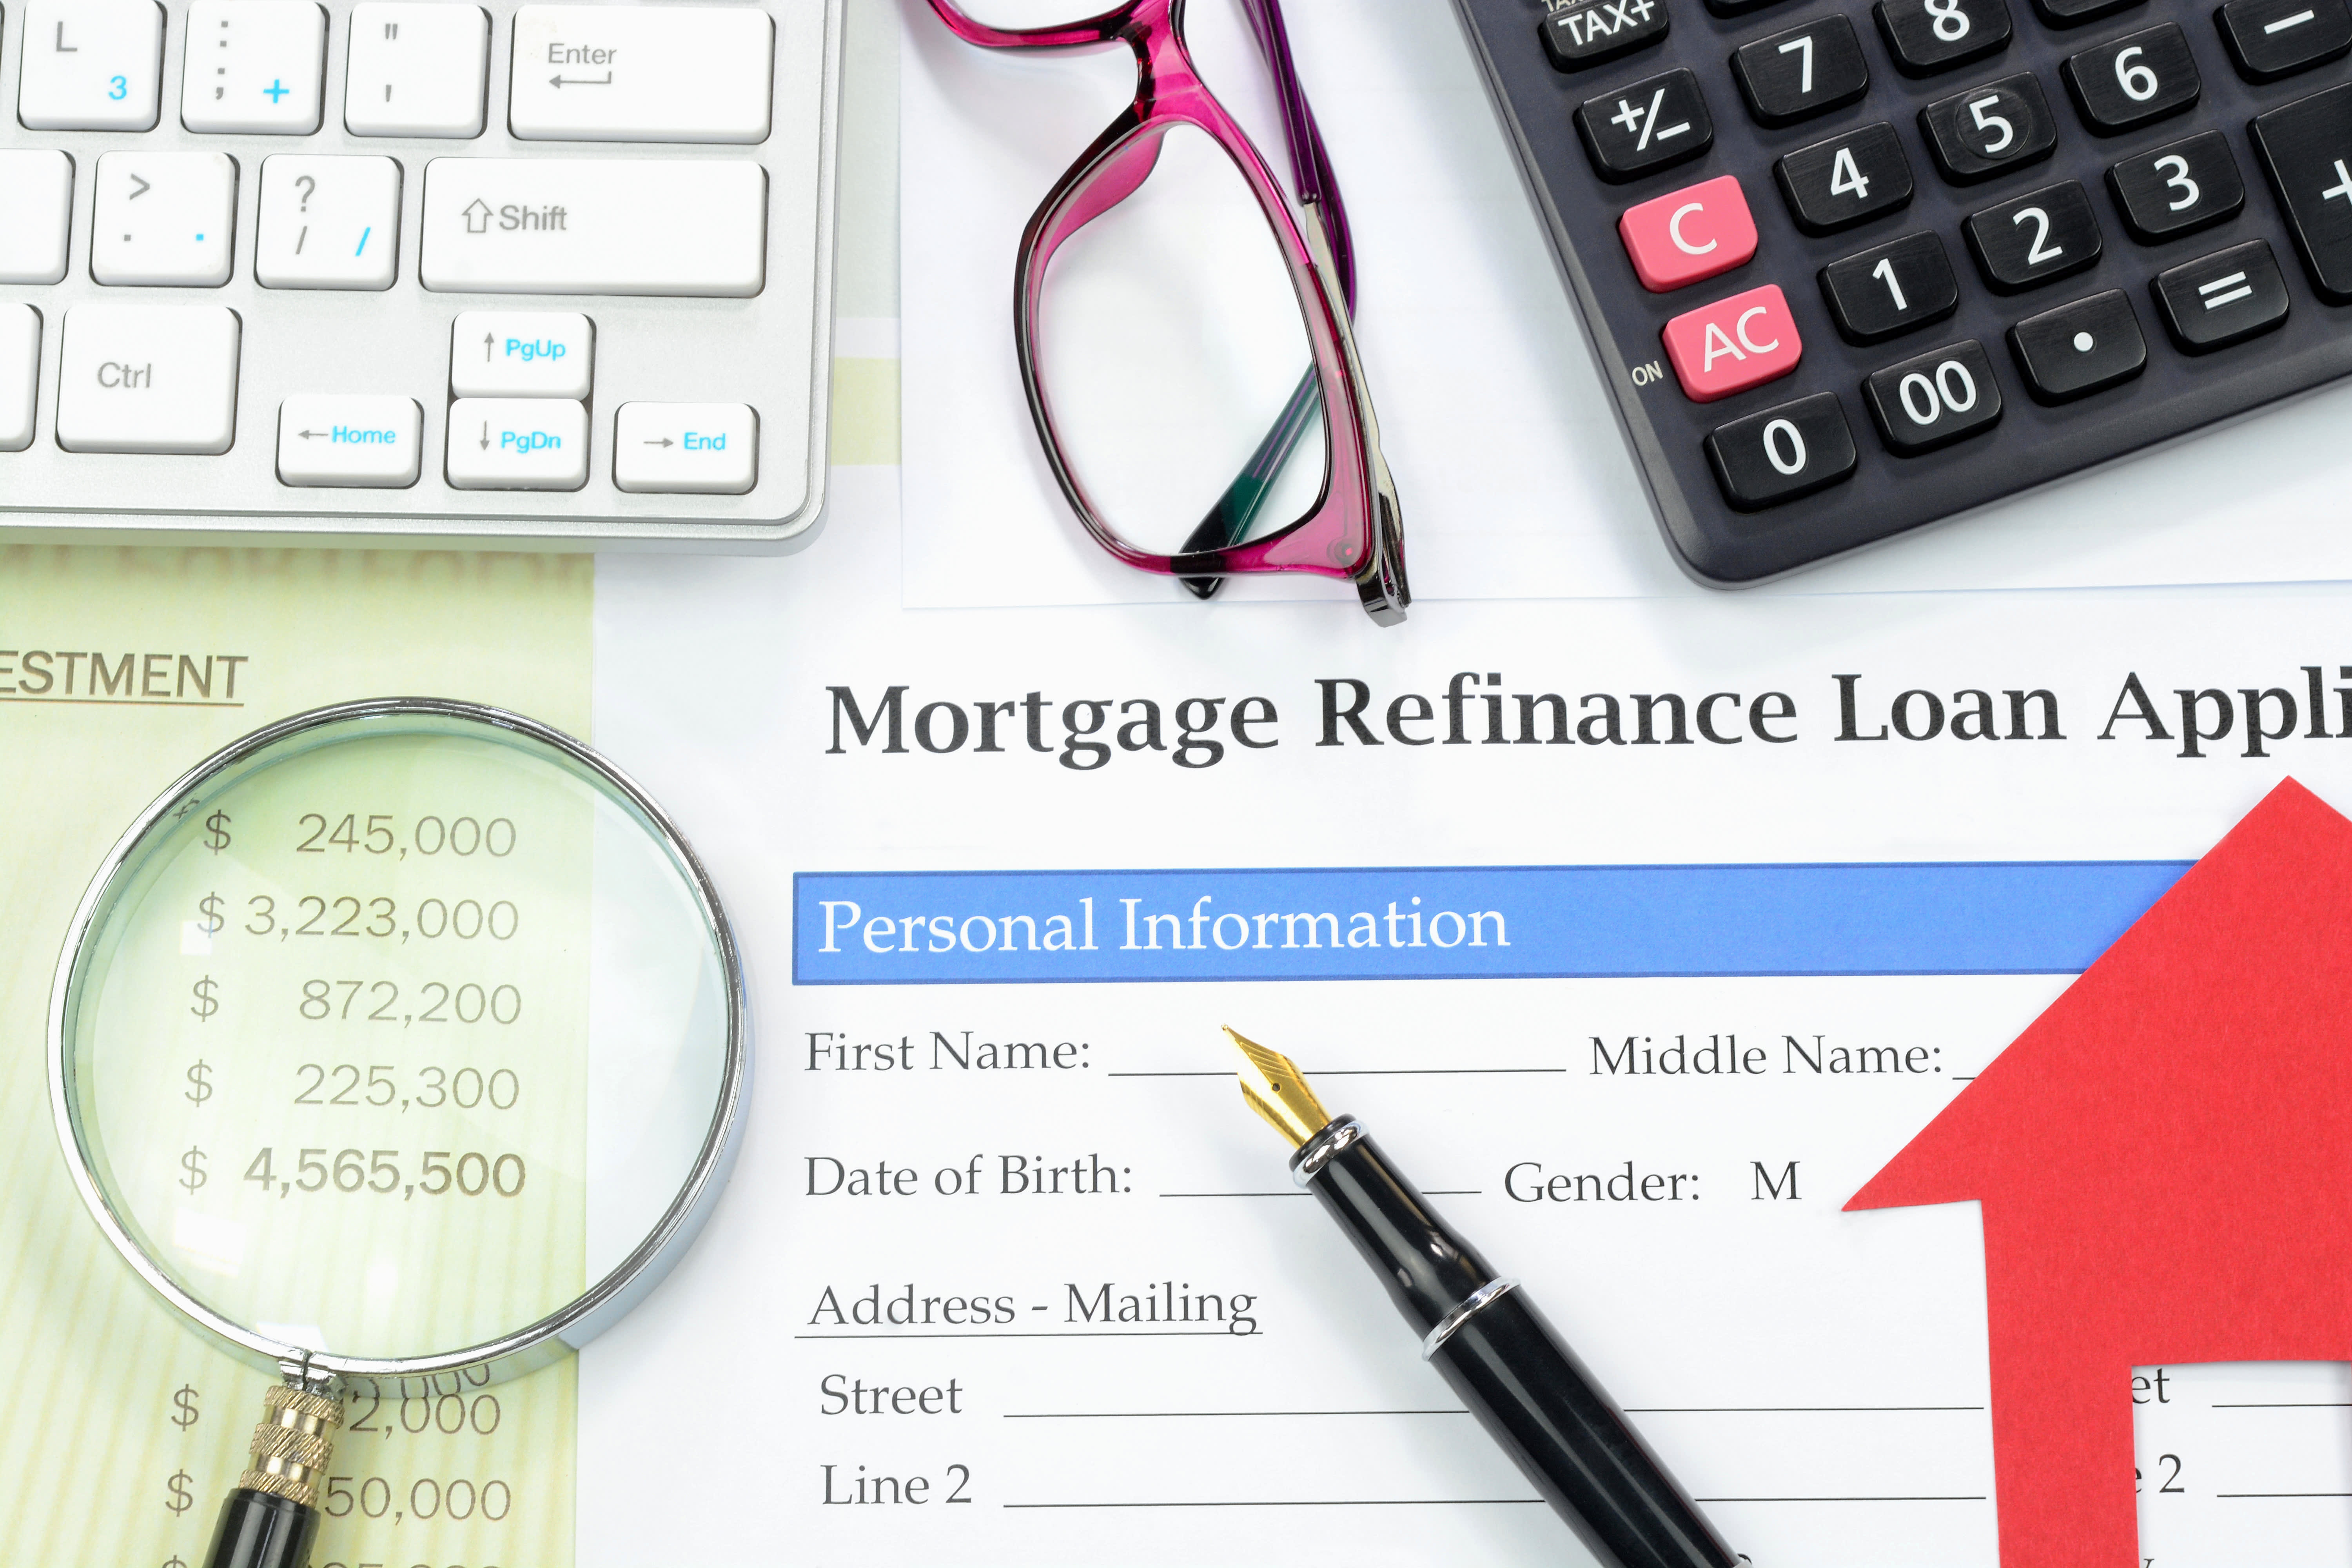 More than 5 million borrowers just missed their chance to save on a mortgage ref..